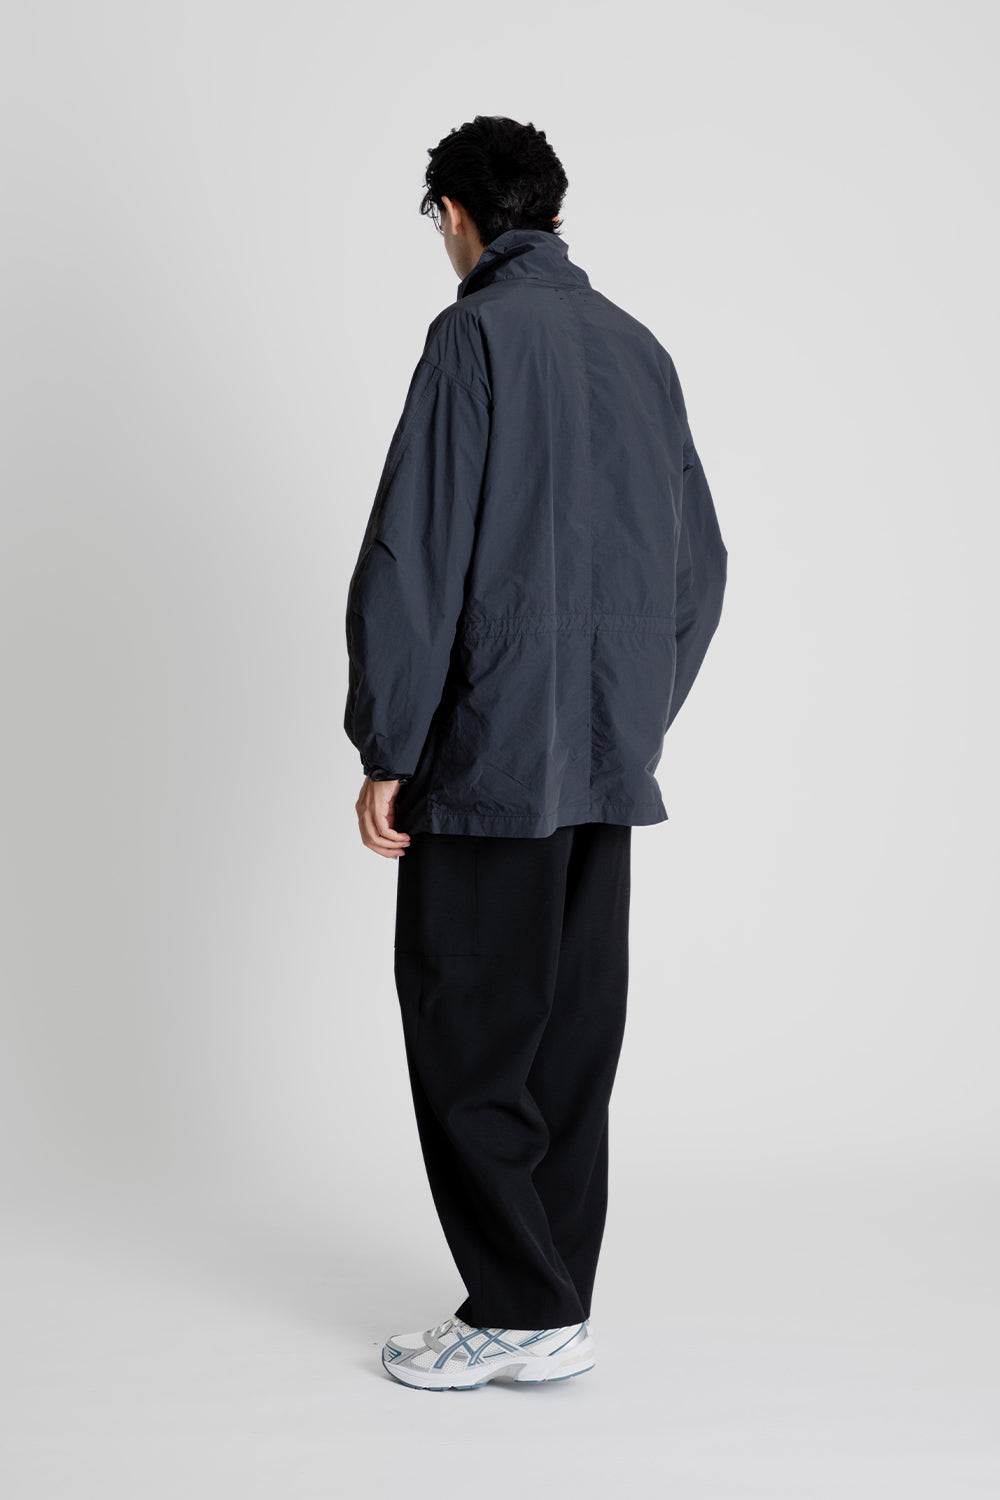 Aton Air Ventile Short Mods Coat in Charcoal Grey | Wallace Mercantil